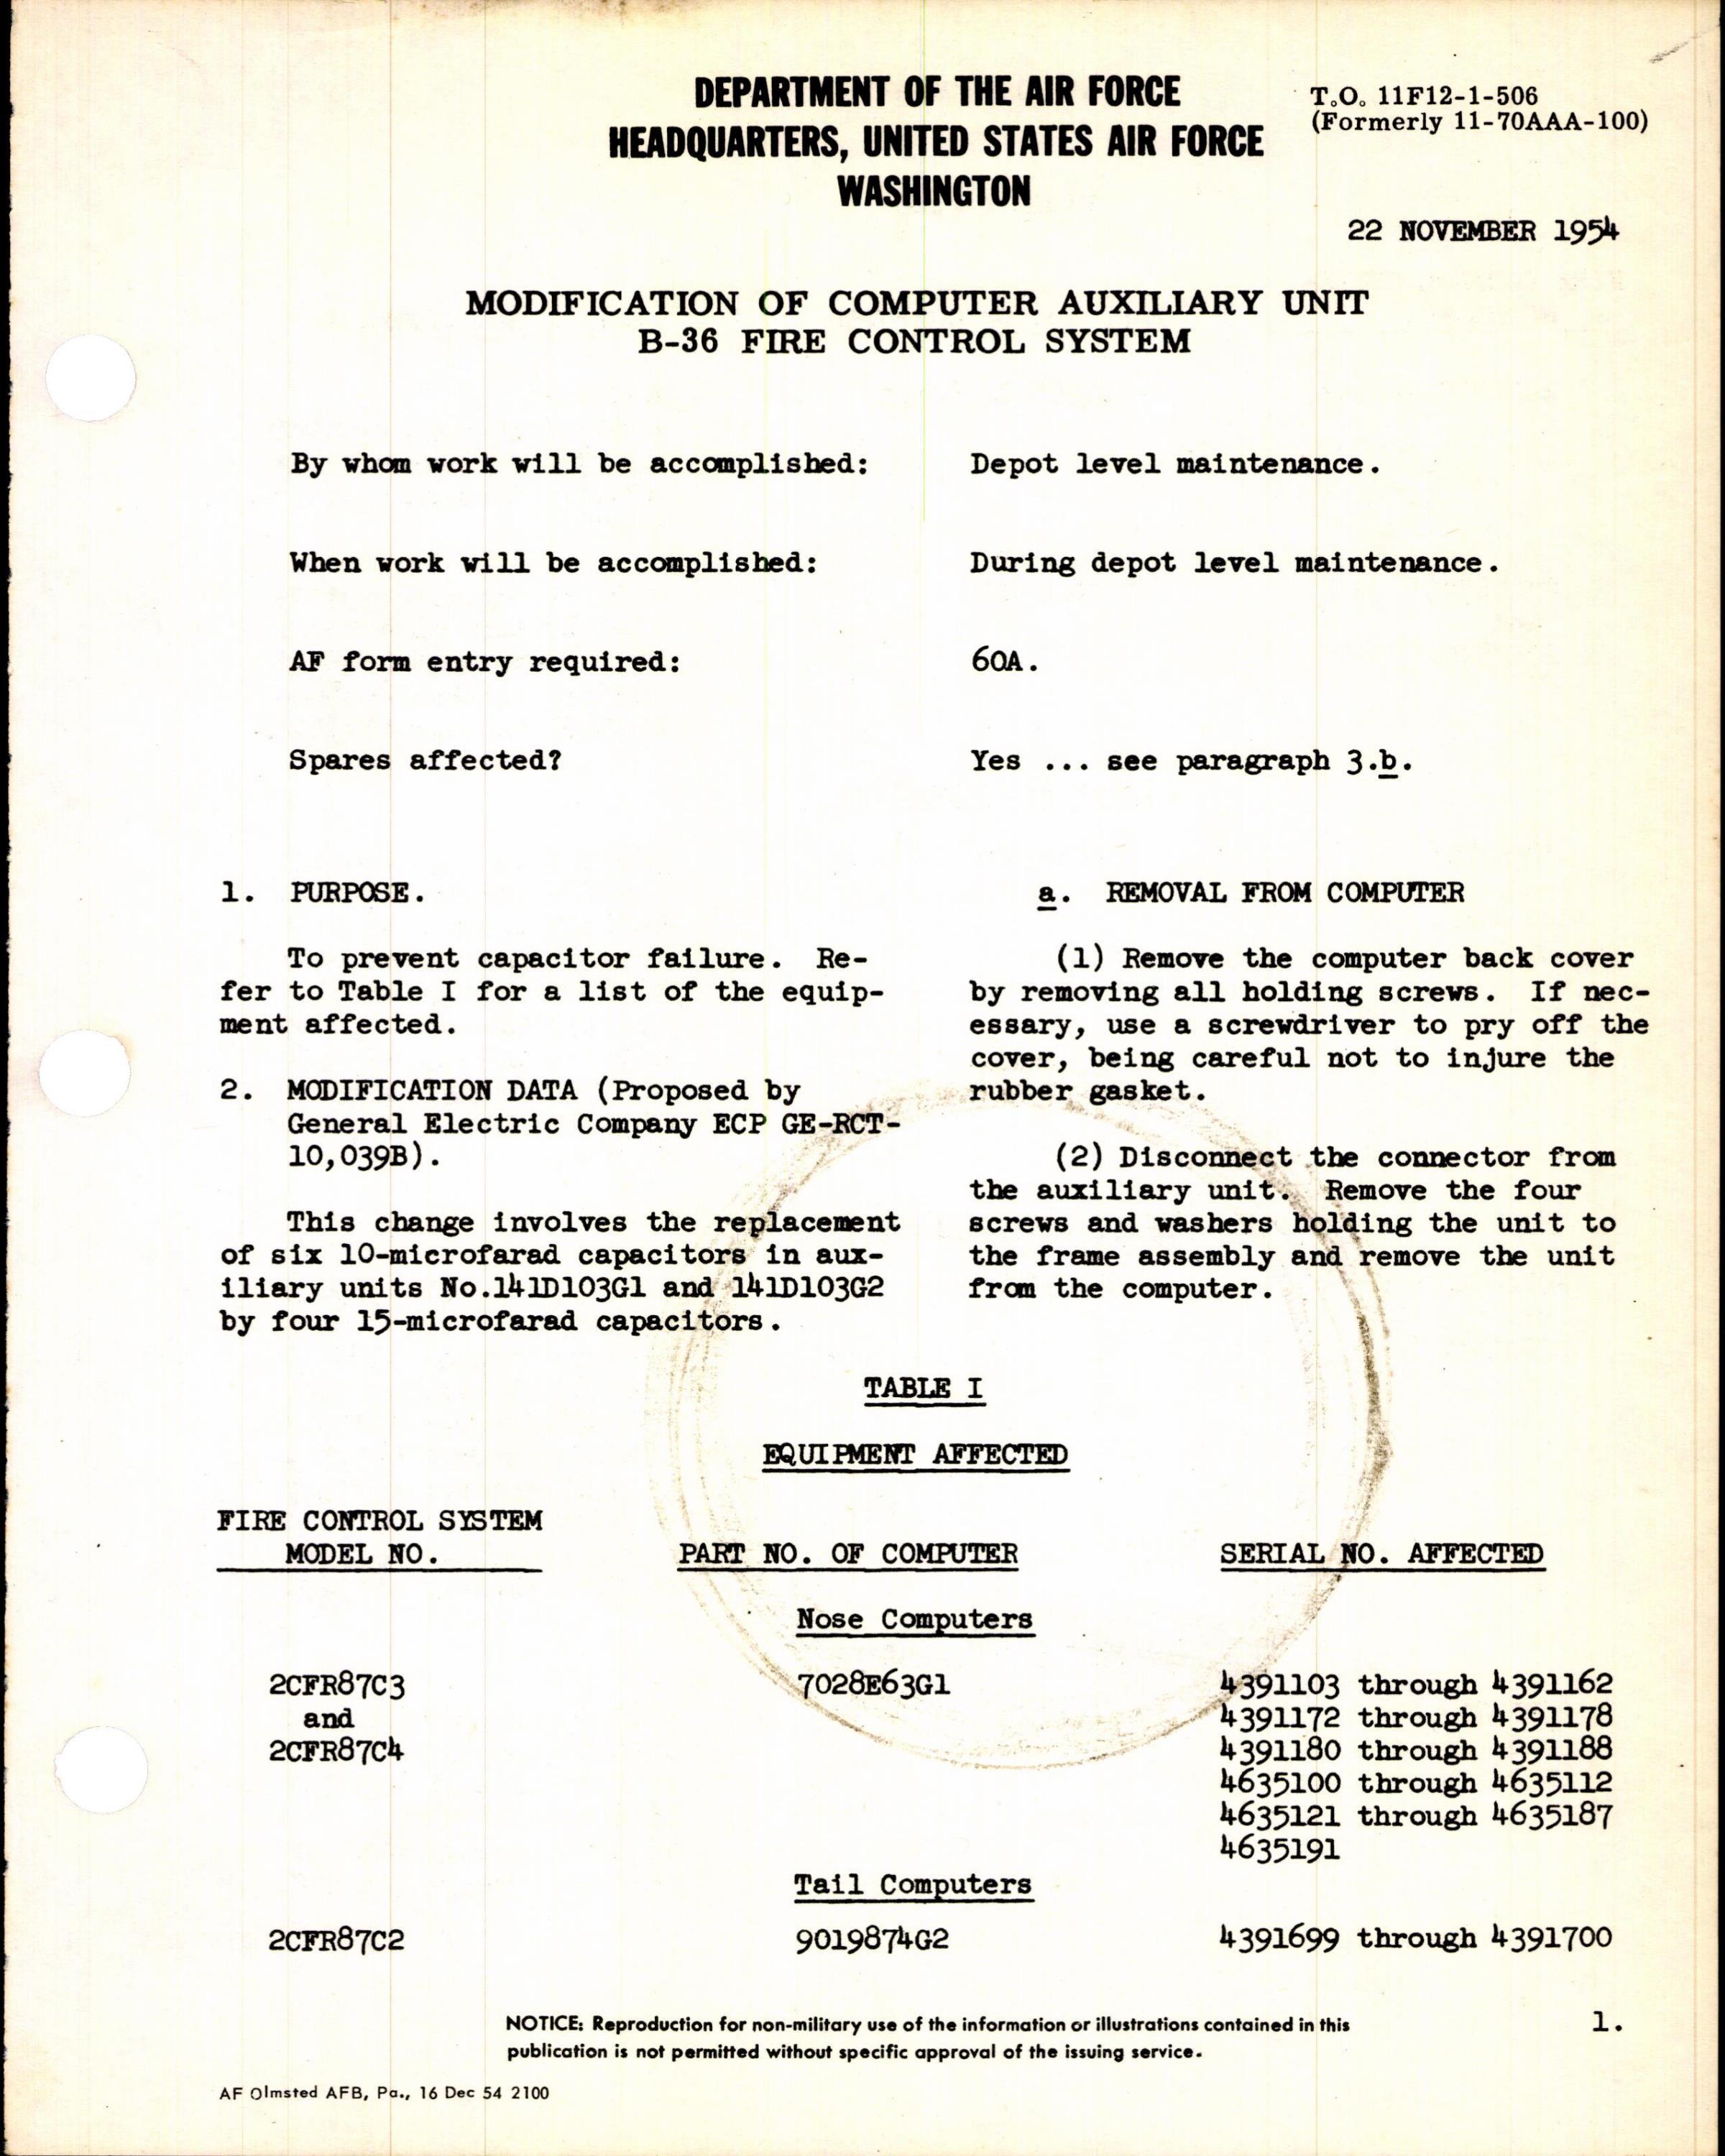 Sample page 1 from AirCorps Library document: Modification of Computer Auxiliary Unit for B-36 Fire Control System